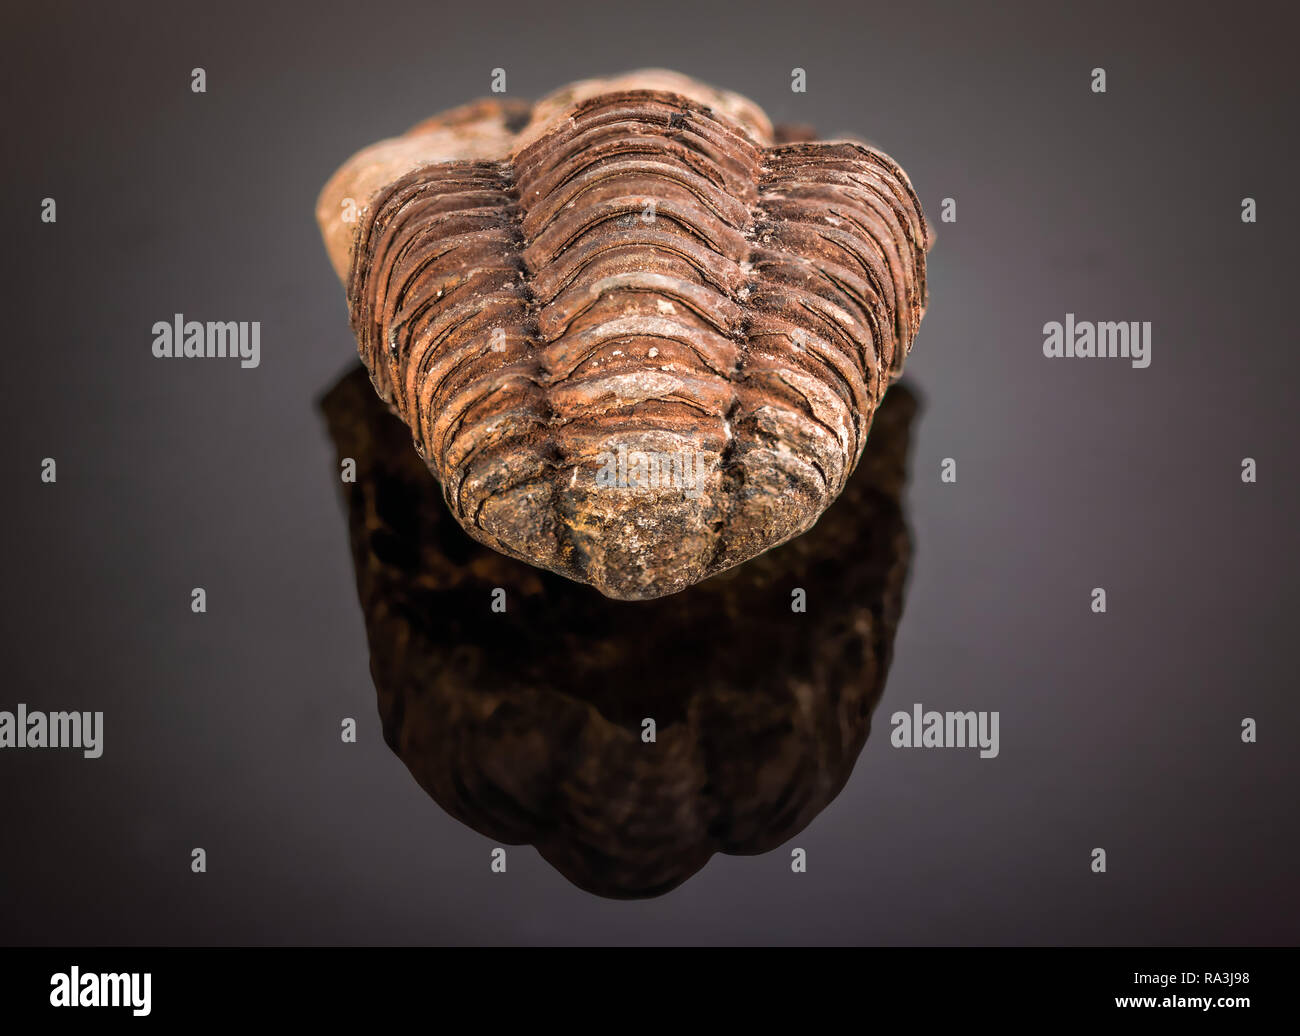 Tail end of a trilobite fossil on a reflective black background Stock Photo